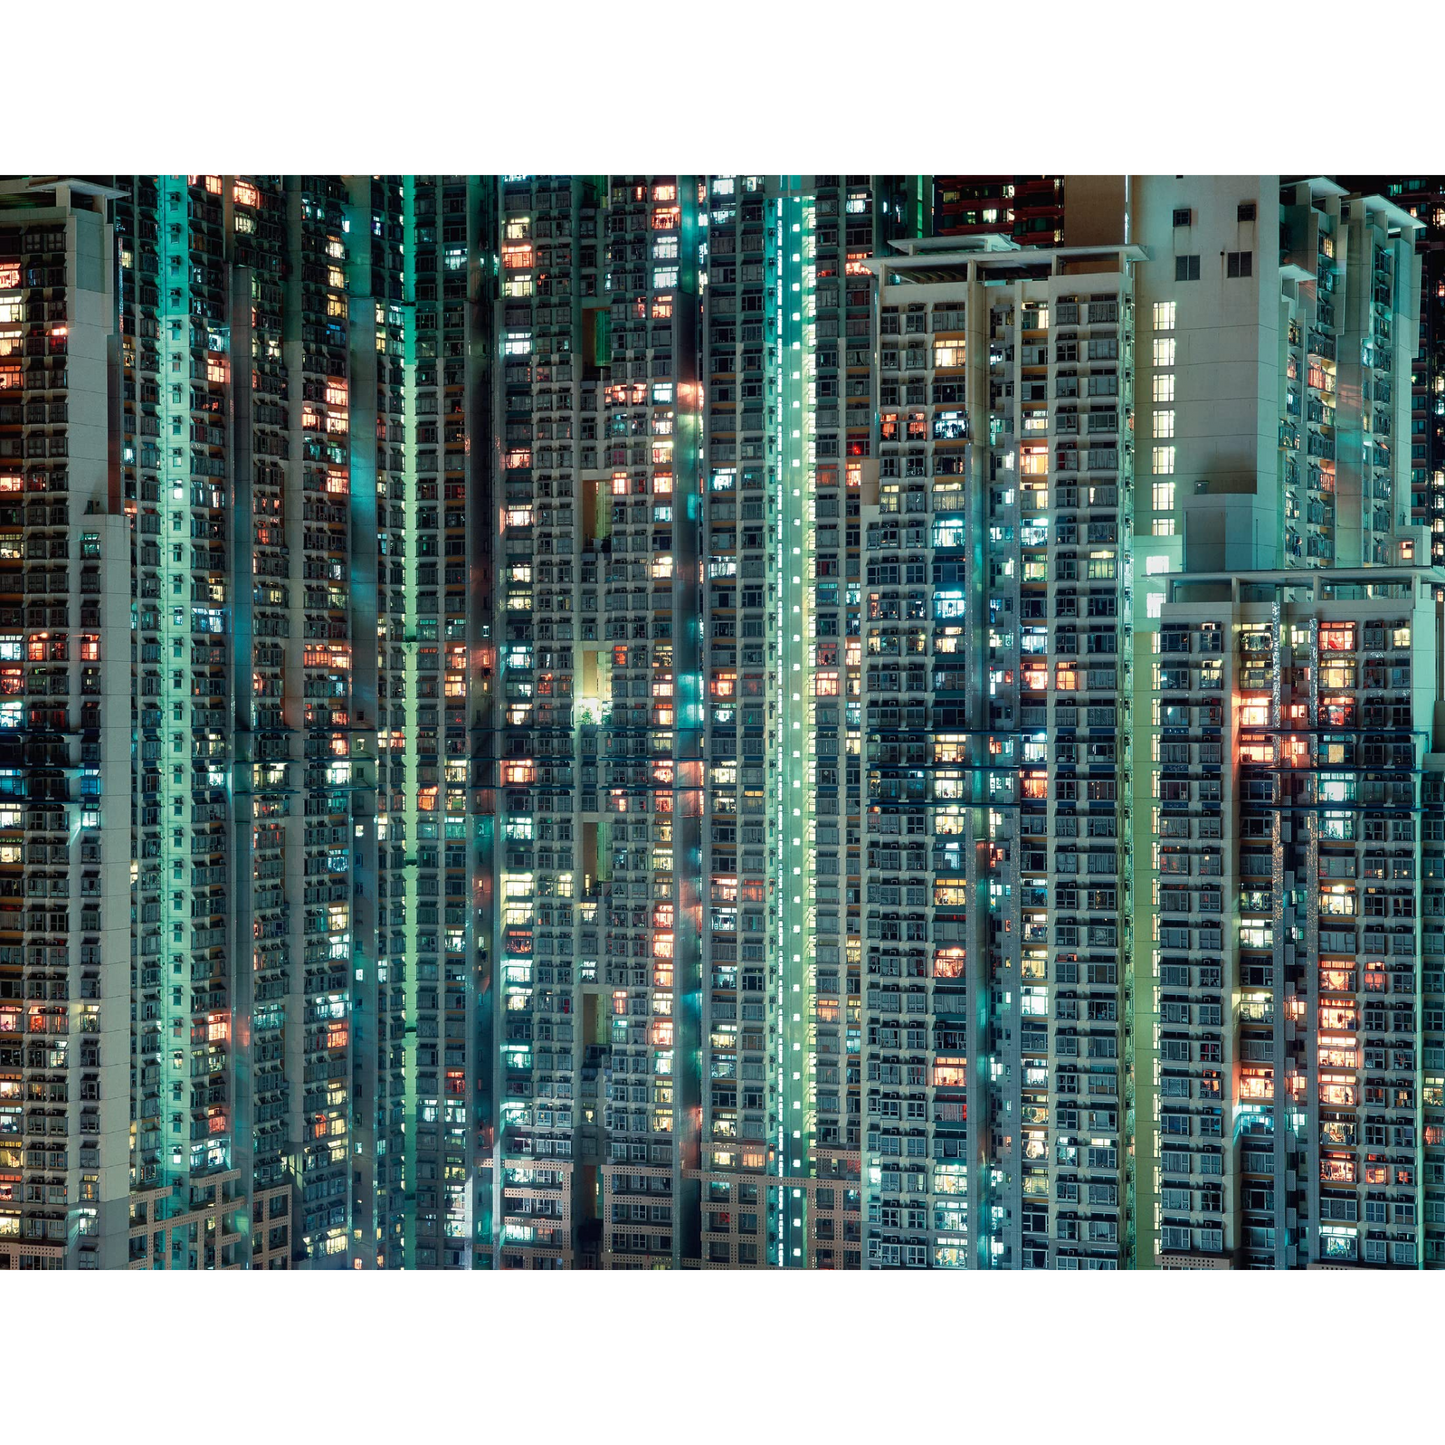 Michael Wolf Architecture Of Density - Hong Kong (new ed)